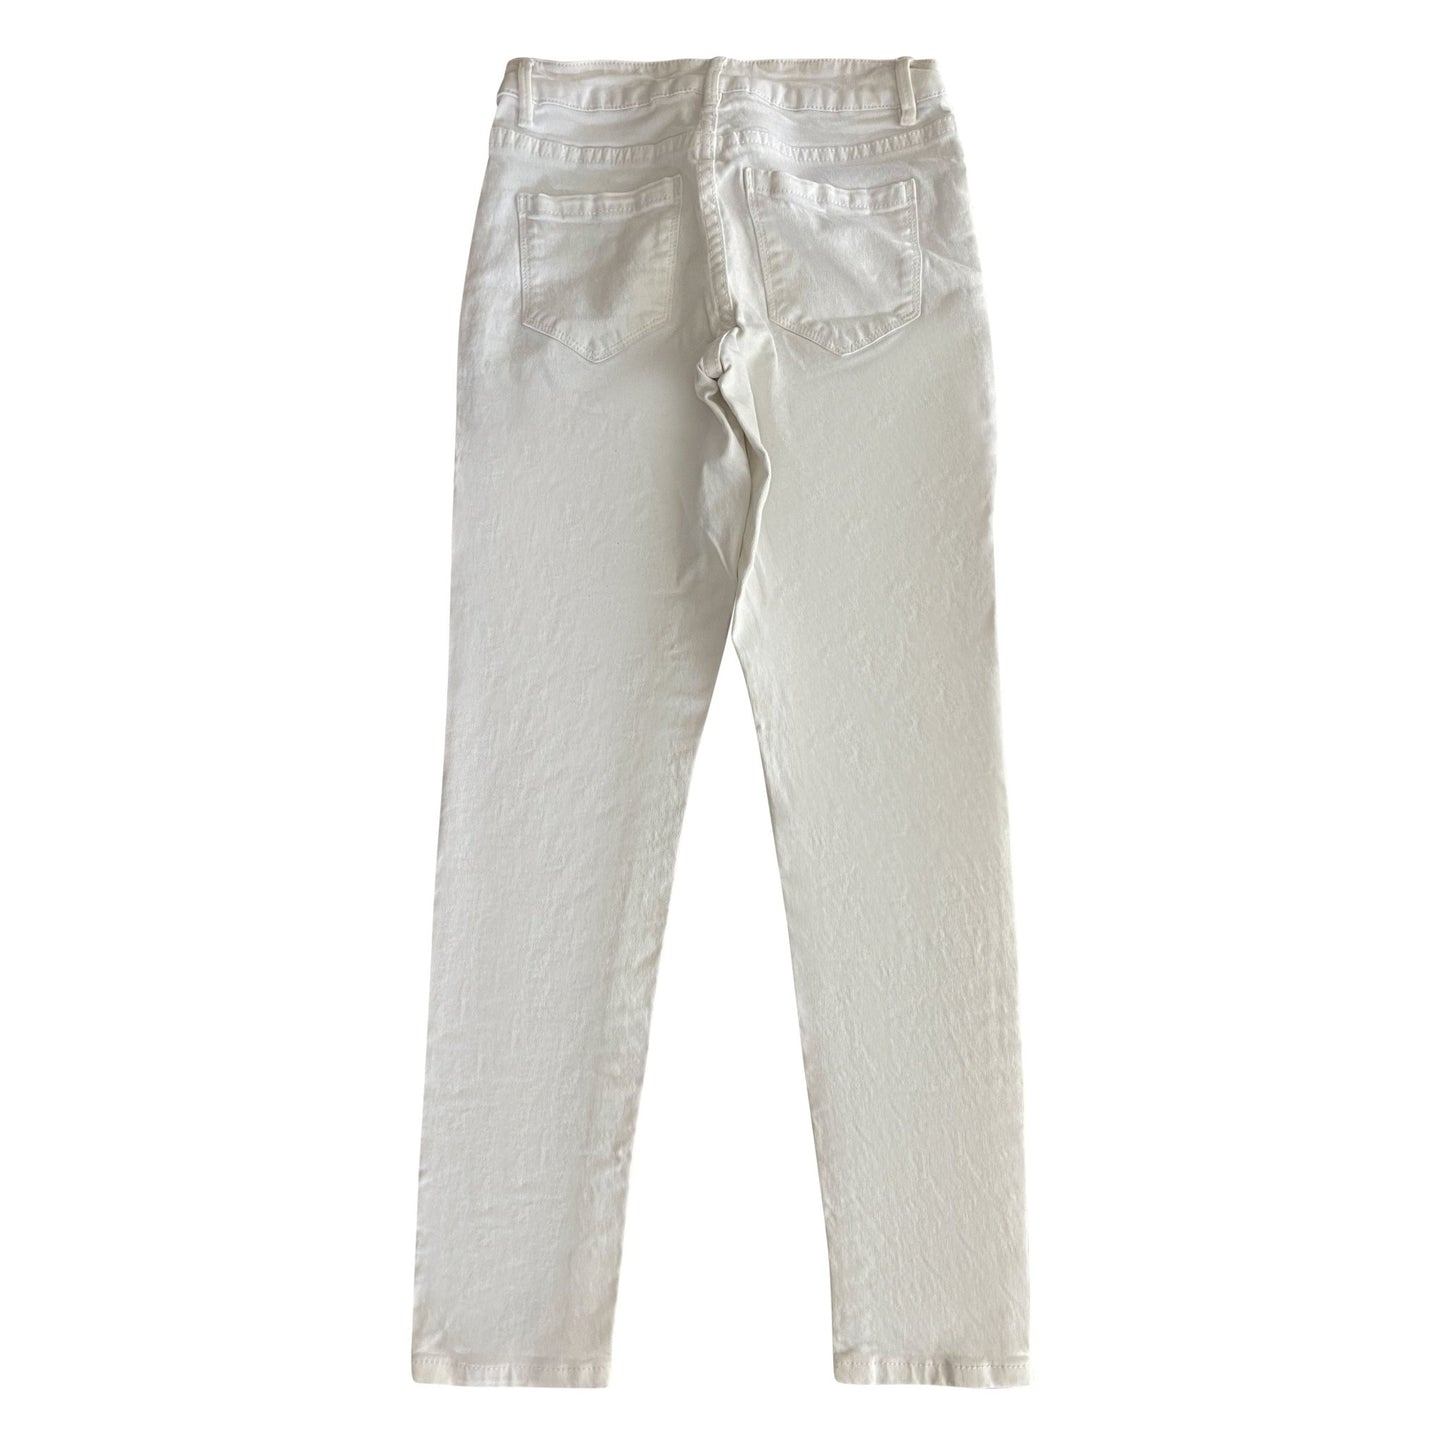 Just Jeans white skinny jeans | size 6